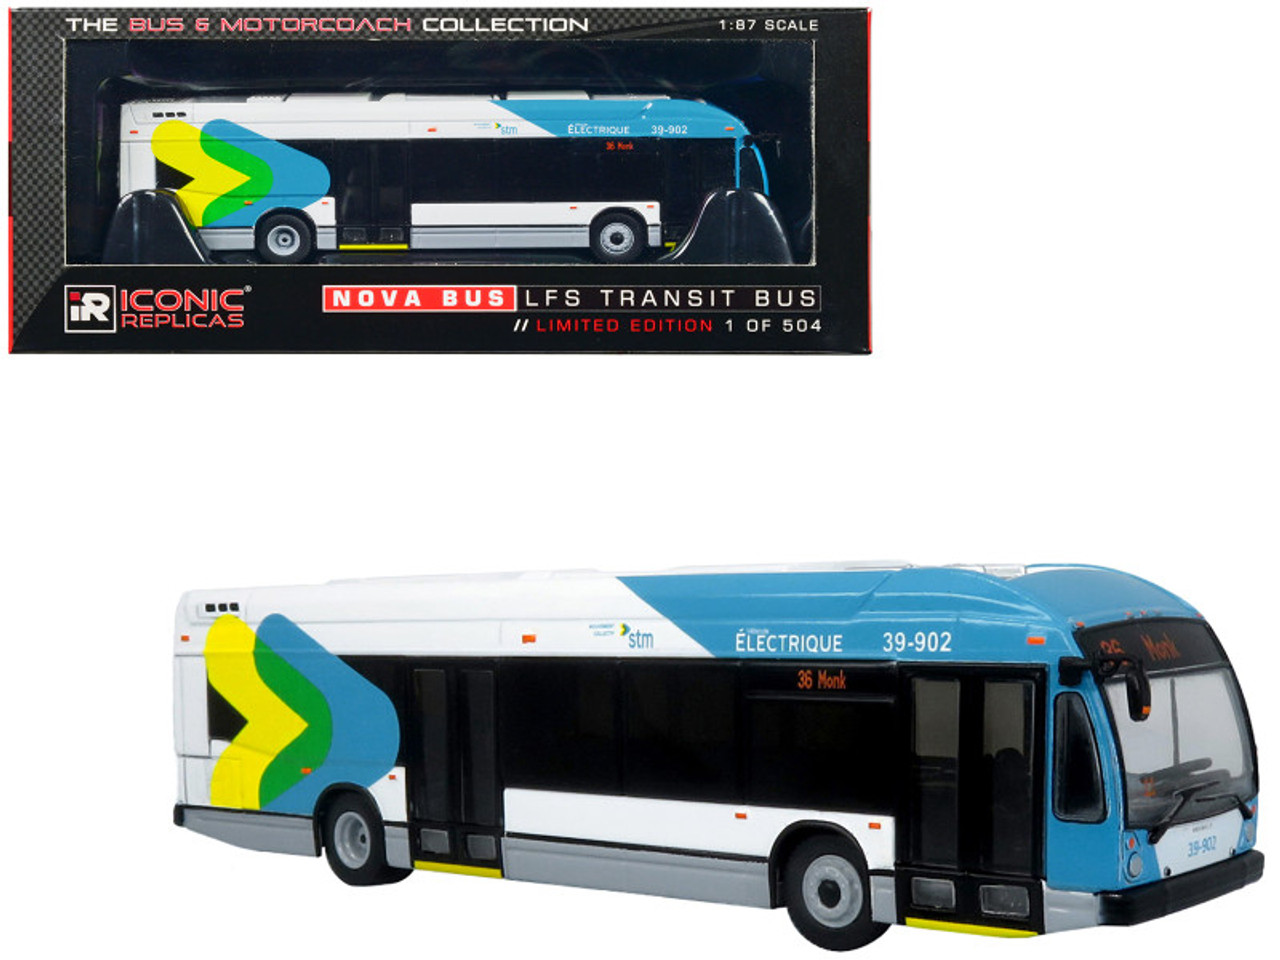 Nova Bus LFSe Electric Transit Bus STM Montreal "36 Monk" Limited Edition to 504 pieces Worldwide "The Bus and Motorcoach Collection" 1/87 (HO) Diecast Model by Iconic Replicas